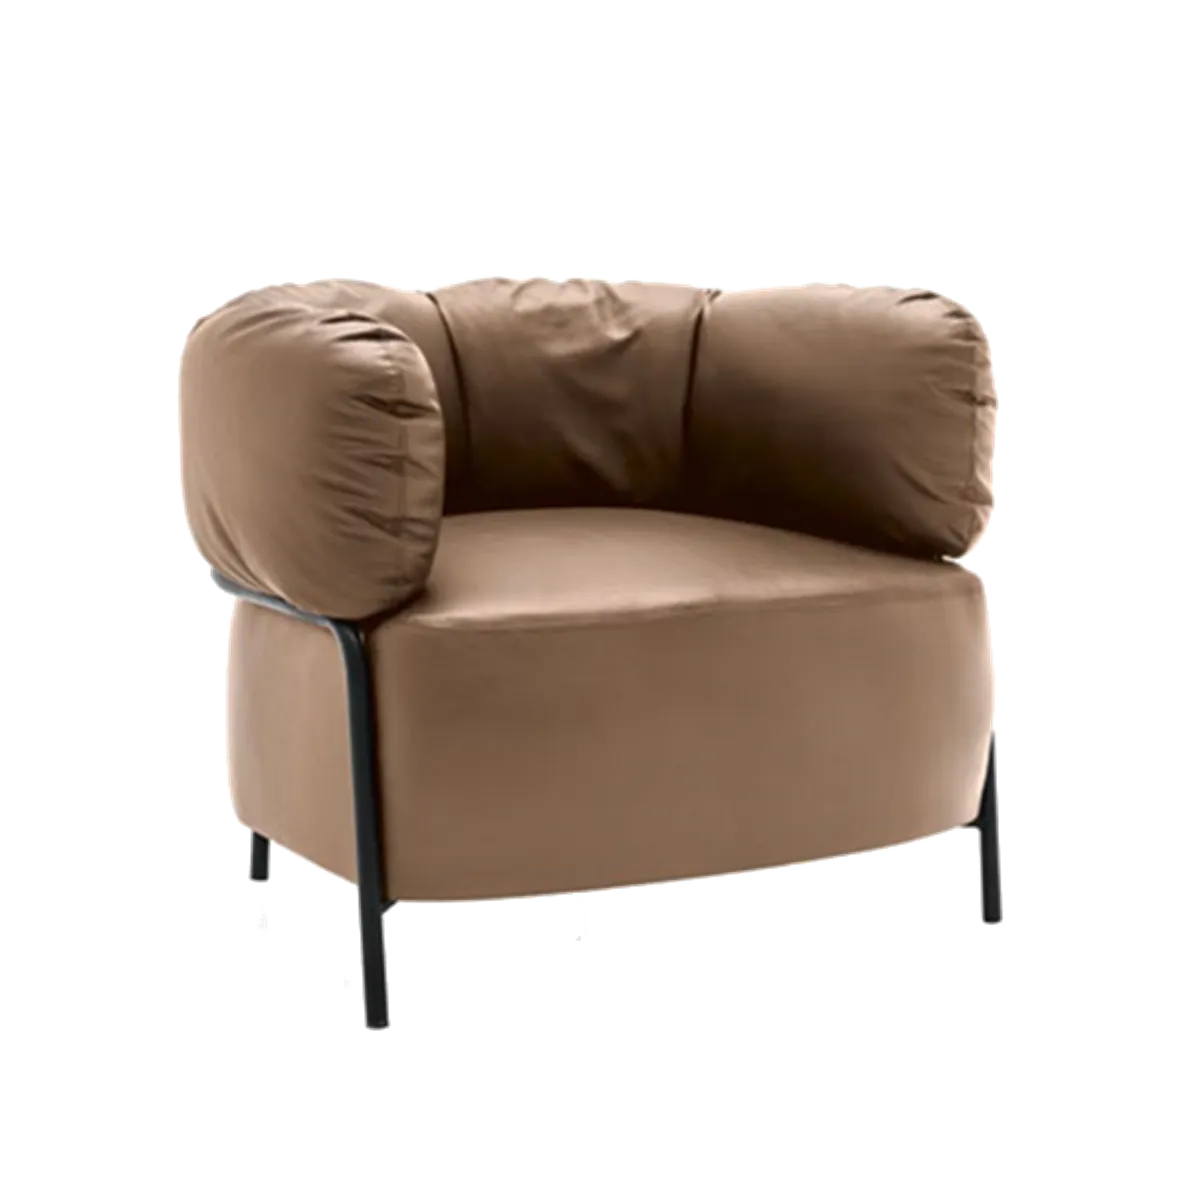 Quadrotta Lounge Chair Inside Out Contracts